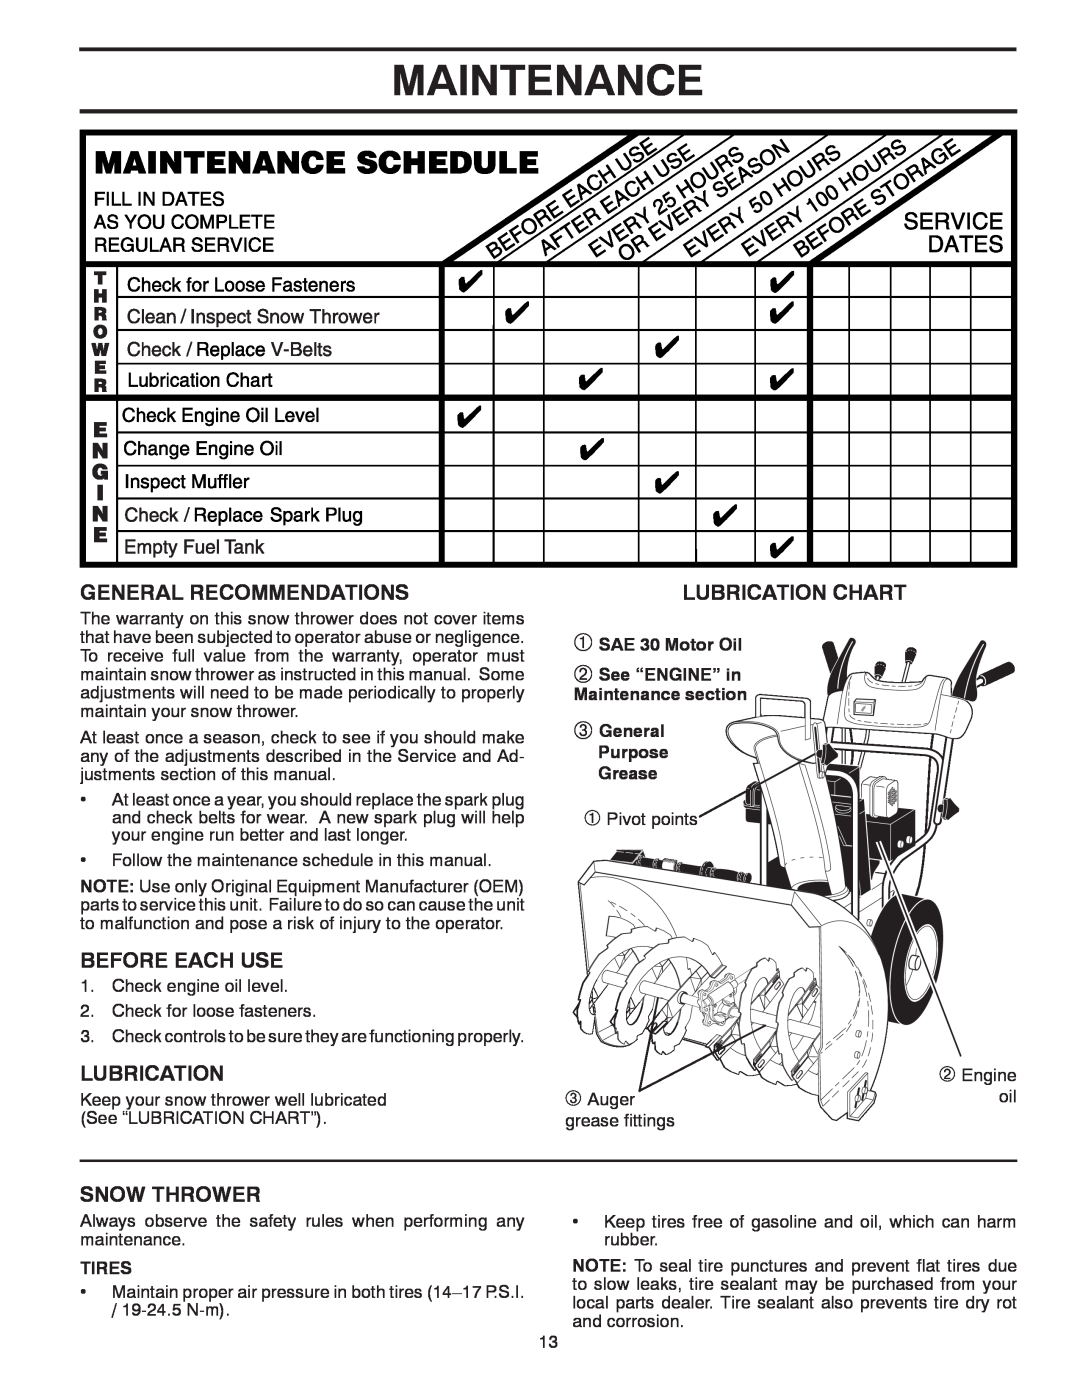 Poulan 422083 Maintenance, General Recommendations, Before Each Use, Snow Thrower, Lubrication Chart, Purpose Grease 